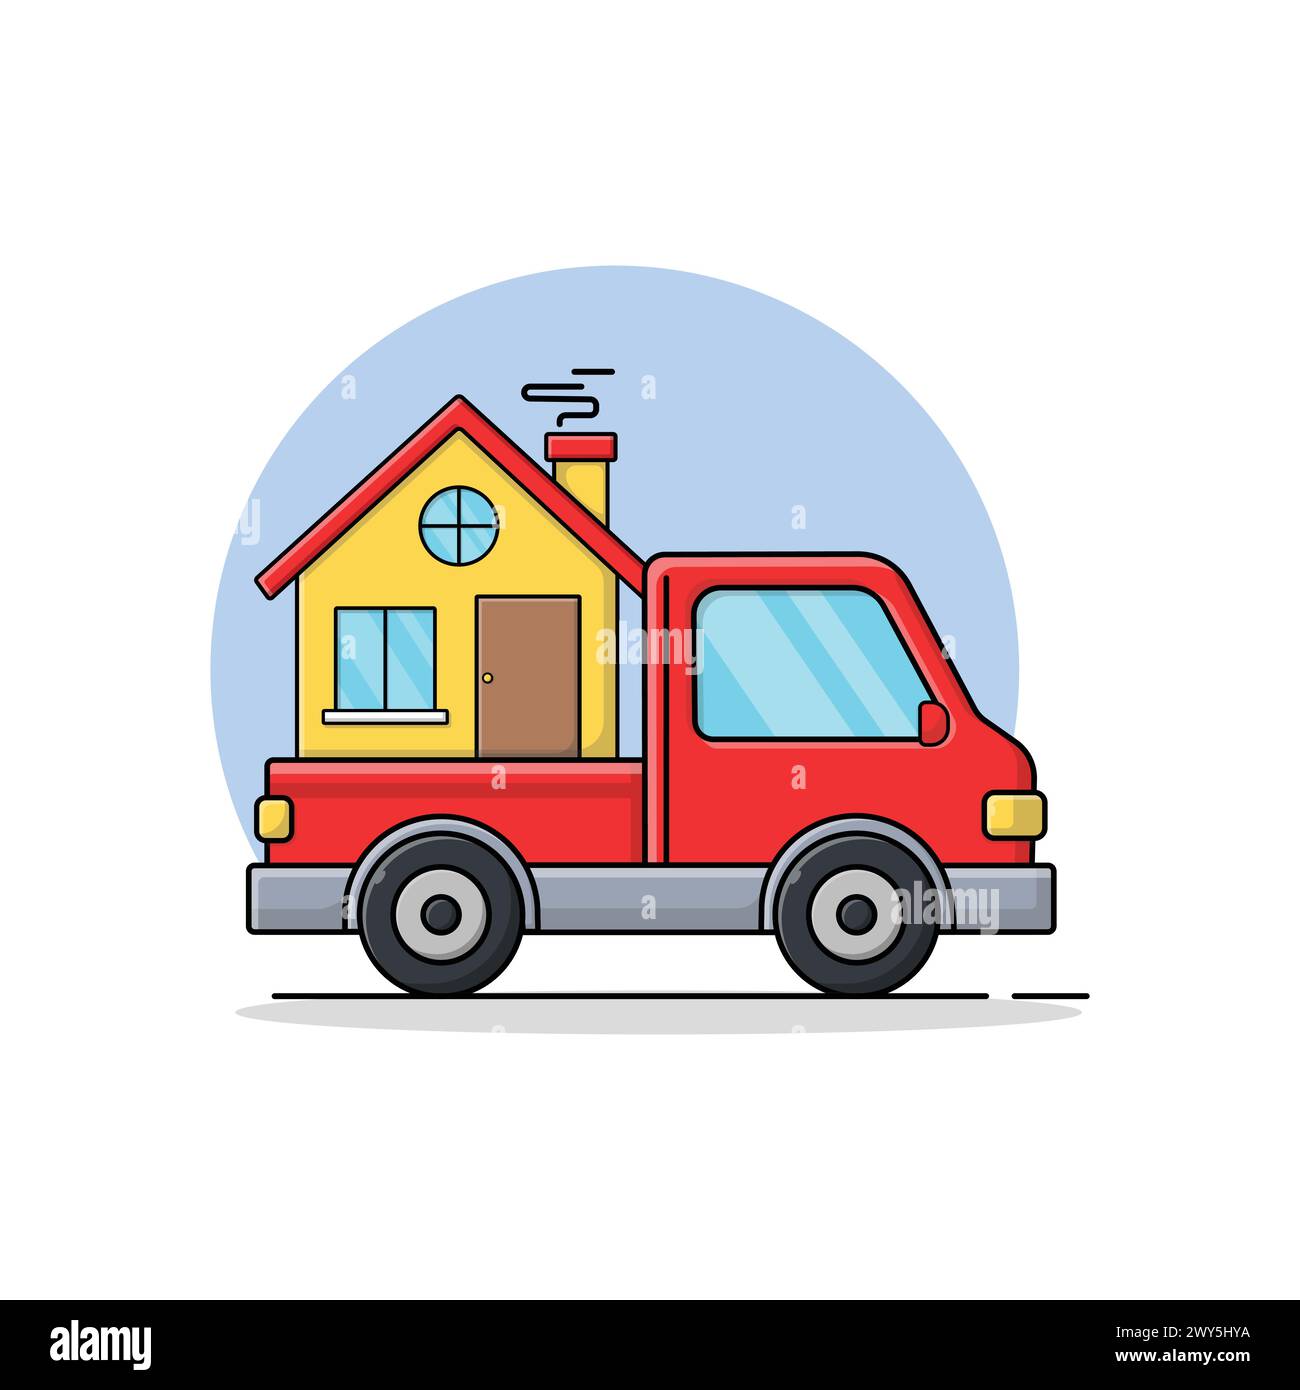 House on Delivery Truck Vector Illustration. House Moving Service Concept Design Stock Vector